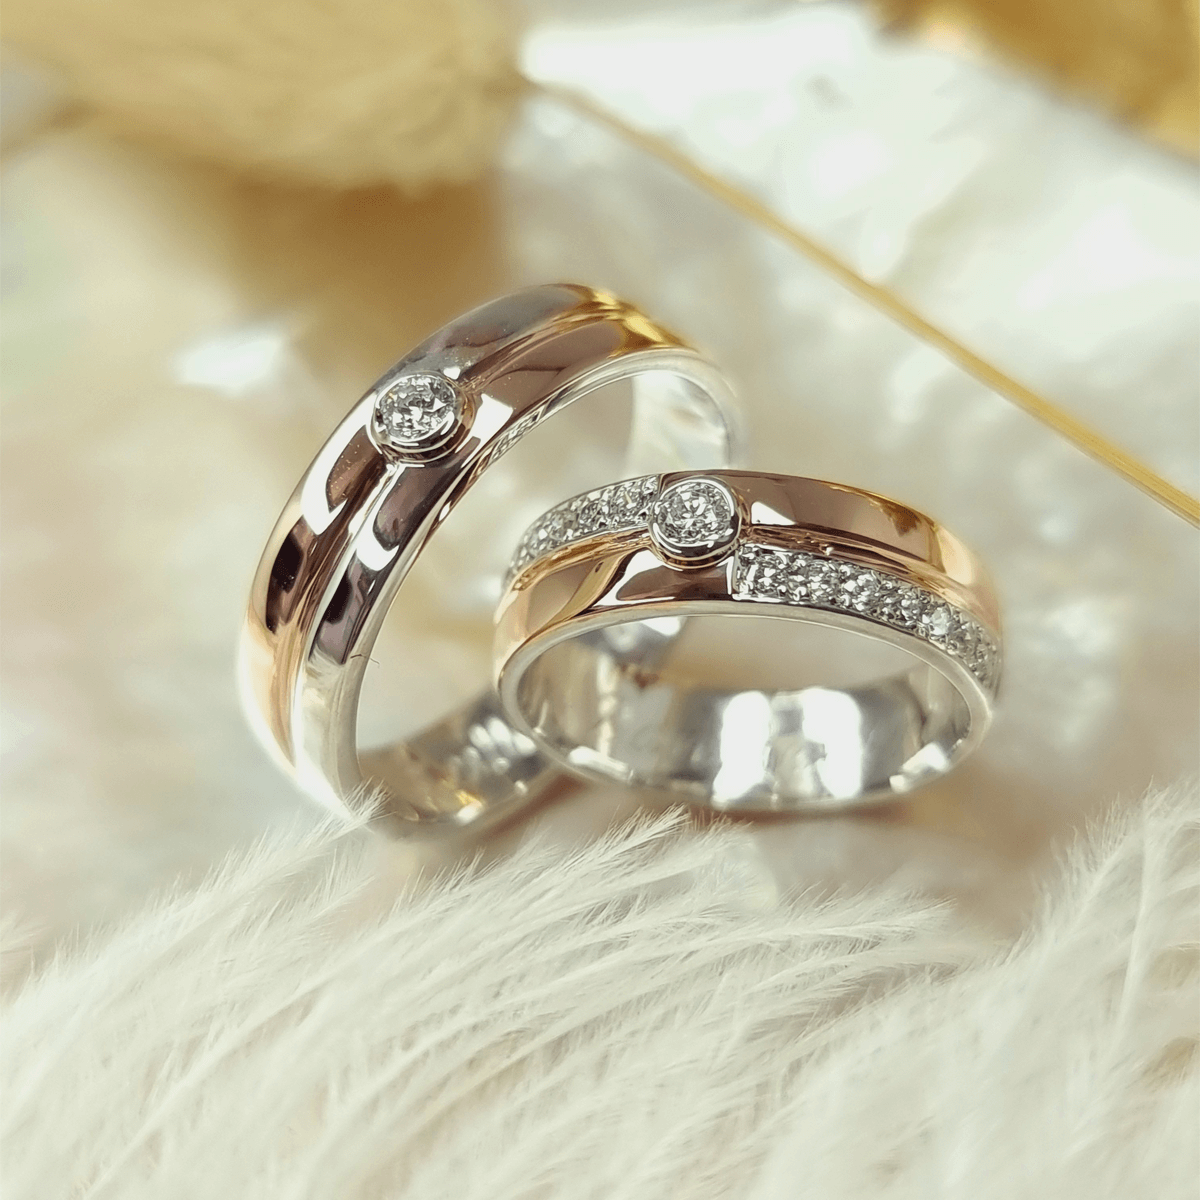 What are some best wedding ring designs?